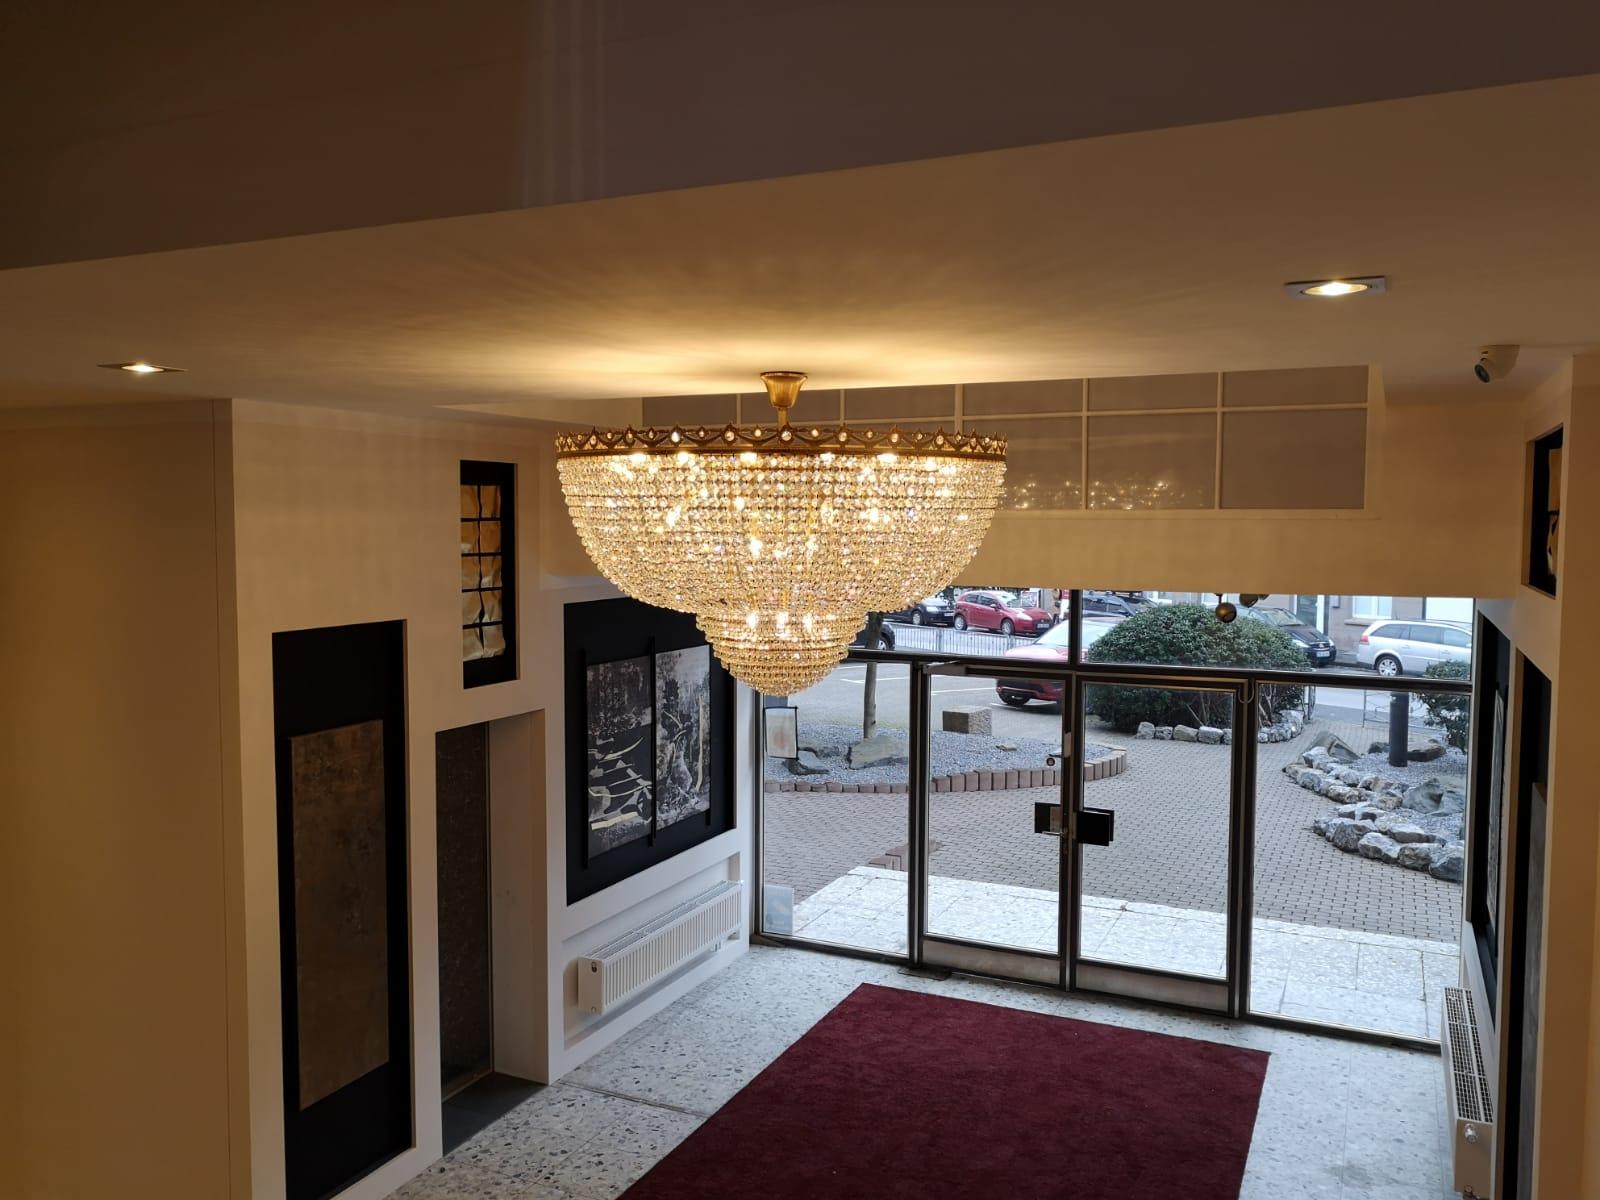 Introducing the New Montgolfière Style Chandelier: A Masterpiece of Empire Elegance

Experience the epitome of opulence and craftsmanship with our exquisite Montgolfière style chandelier, expertly handcrafted in Berlin. This chandelier is a